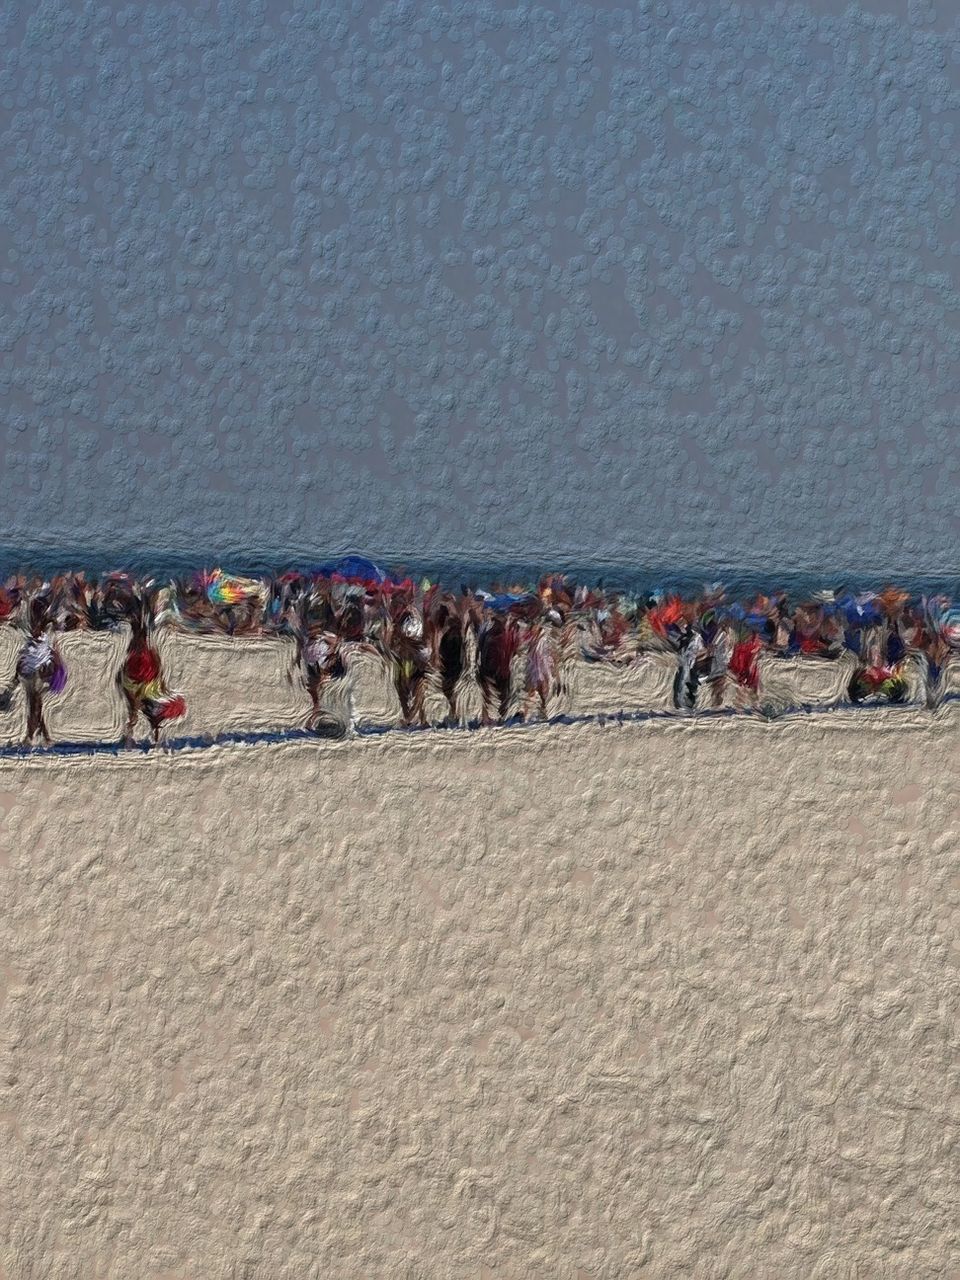 large group of people, lifestyles, men, leisure activity, person, mixed age range, beach, high angle view, vacations, tourist, walking, day, outdoors, sand, enjoyment, togetherness, standing, sunlight, crowd